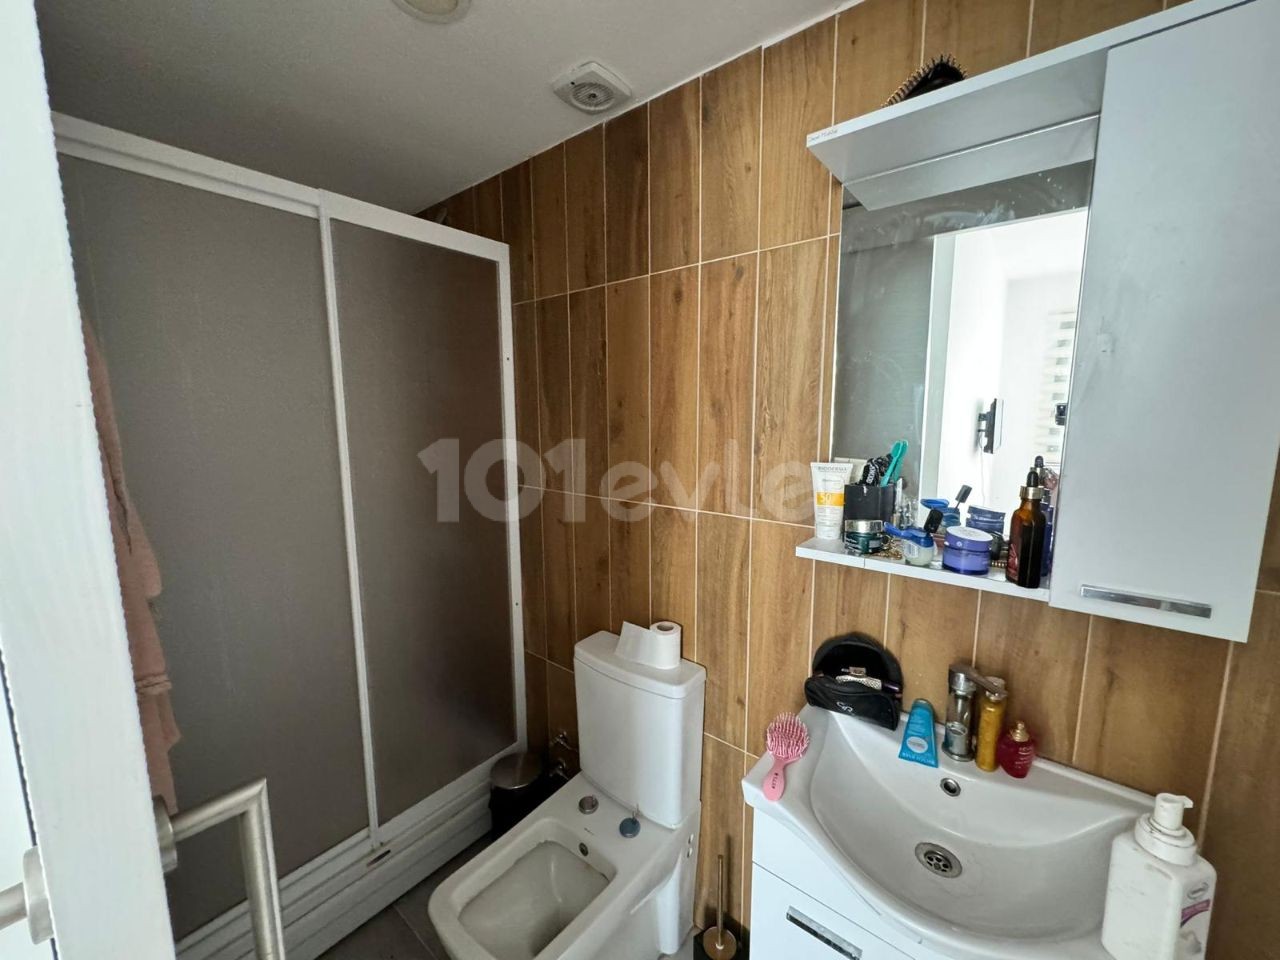 2+1 LARGE FLAT WITH ENSURE BATHROOM AND CLOSET ROOM FOR SALE IN GONYELI